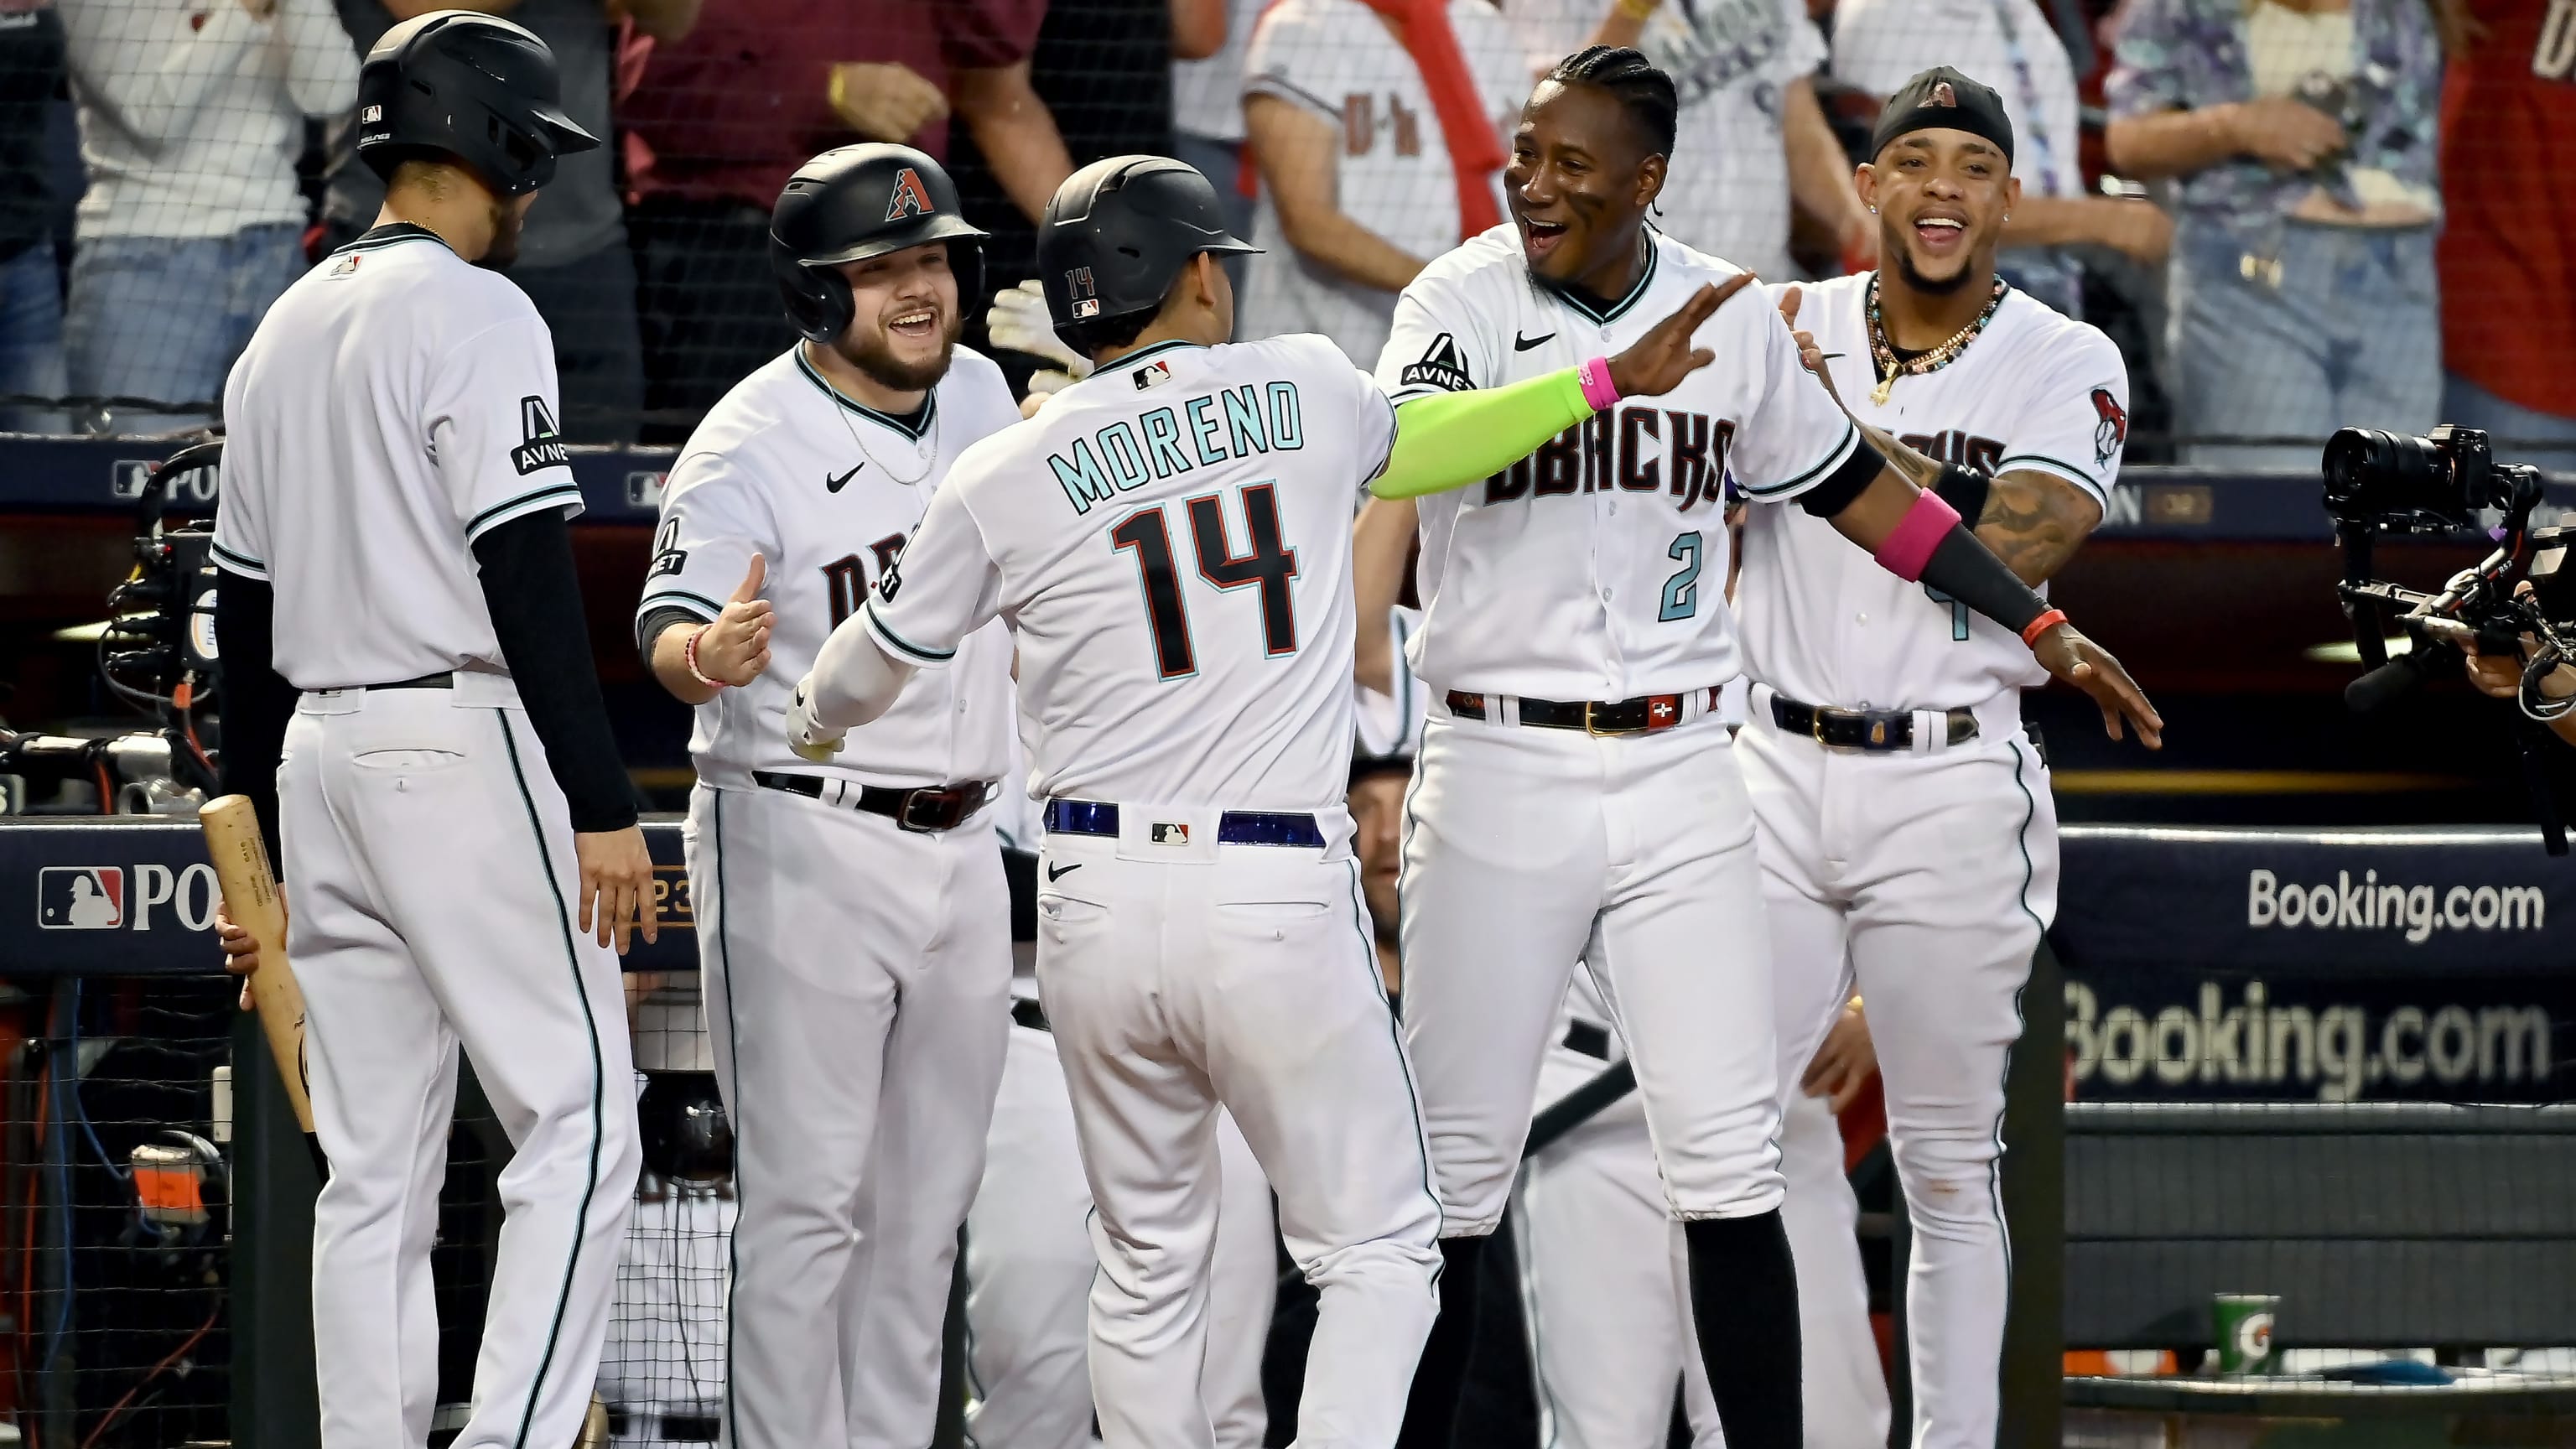 The @Dbacks stunned LA in Game 1. Will they keep the good times